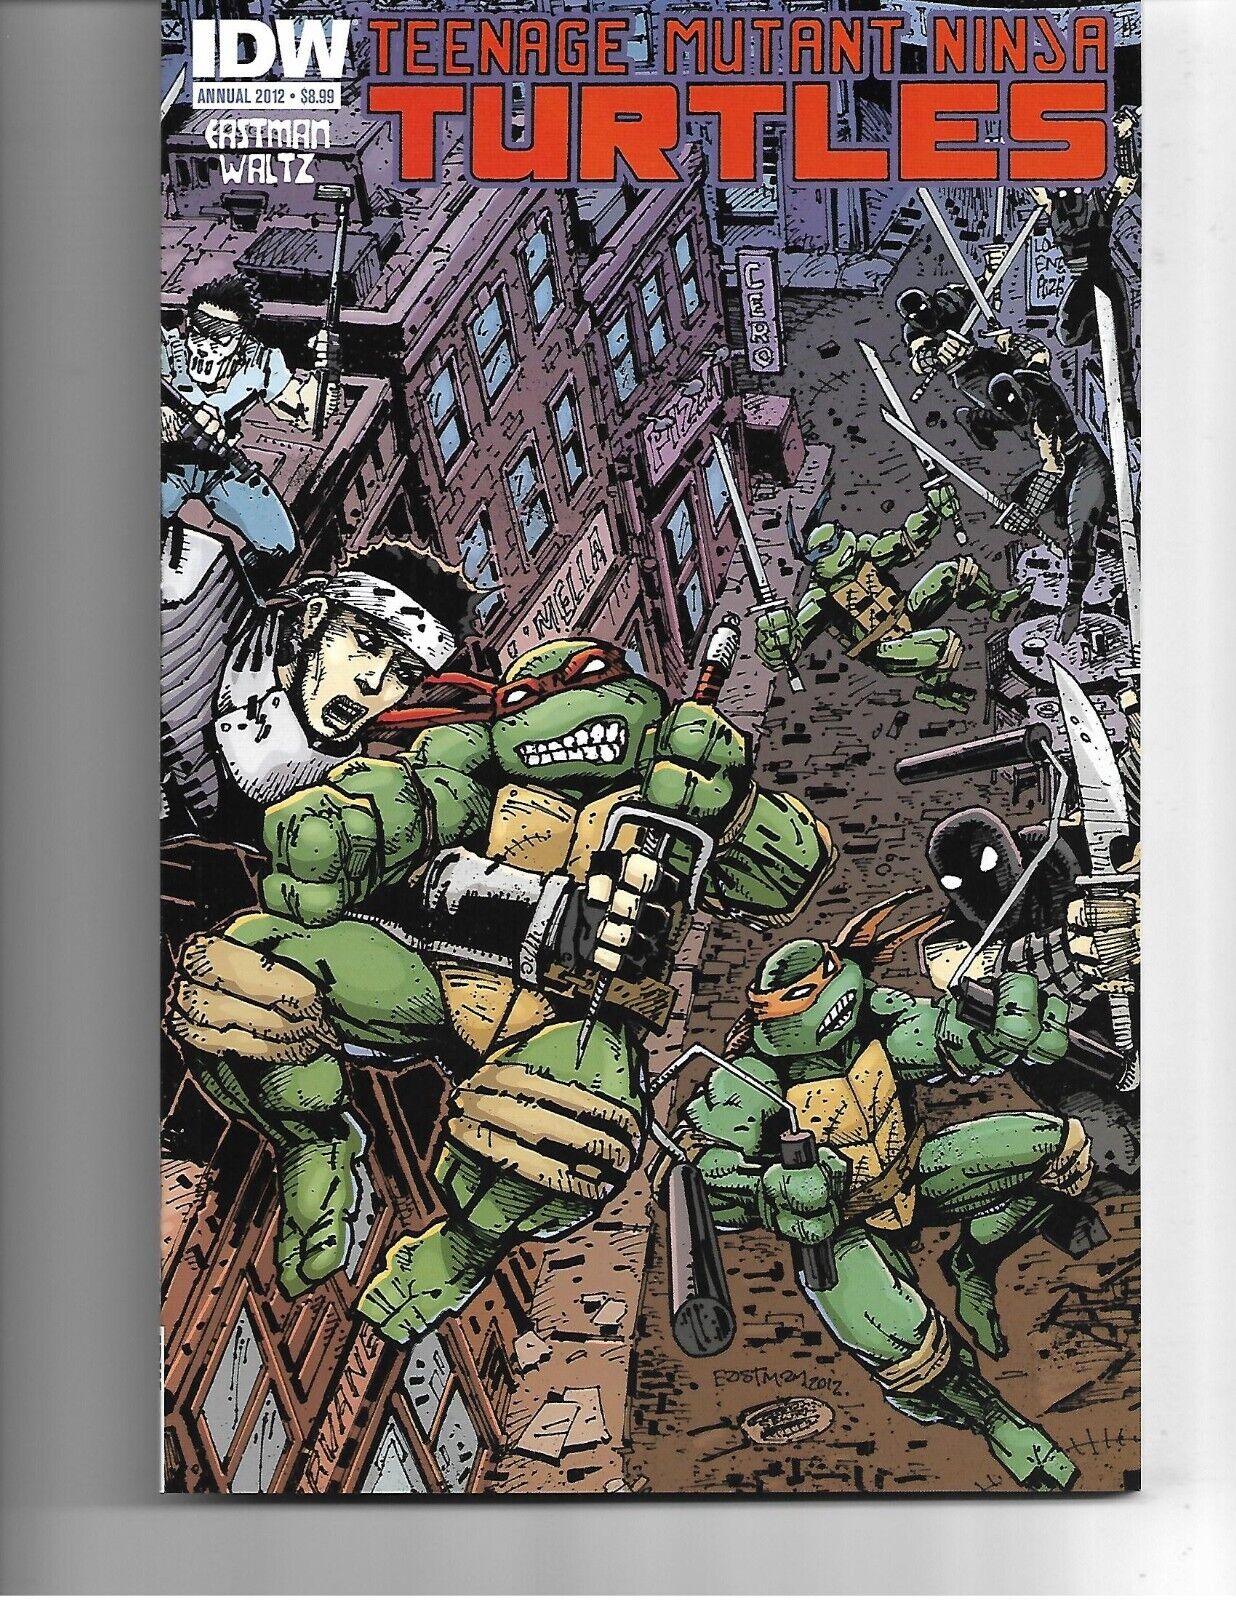 IDW TEENAGE MUTANT NINJA TURTLES 2012 ANNUAL DELUXE EDITION MINT CONDITION